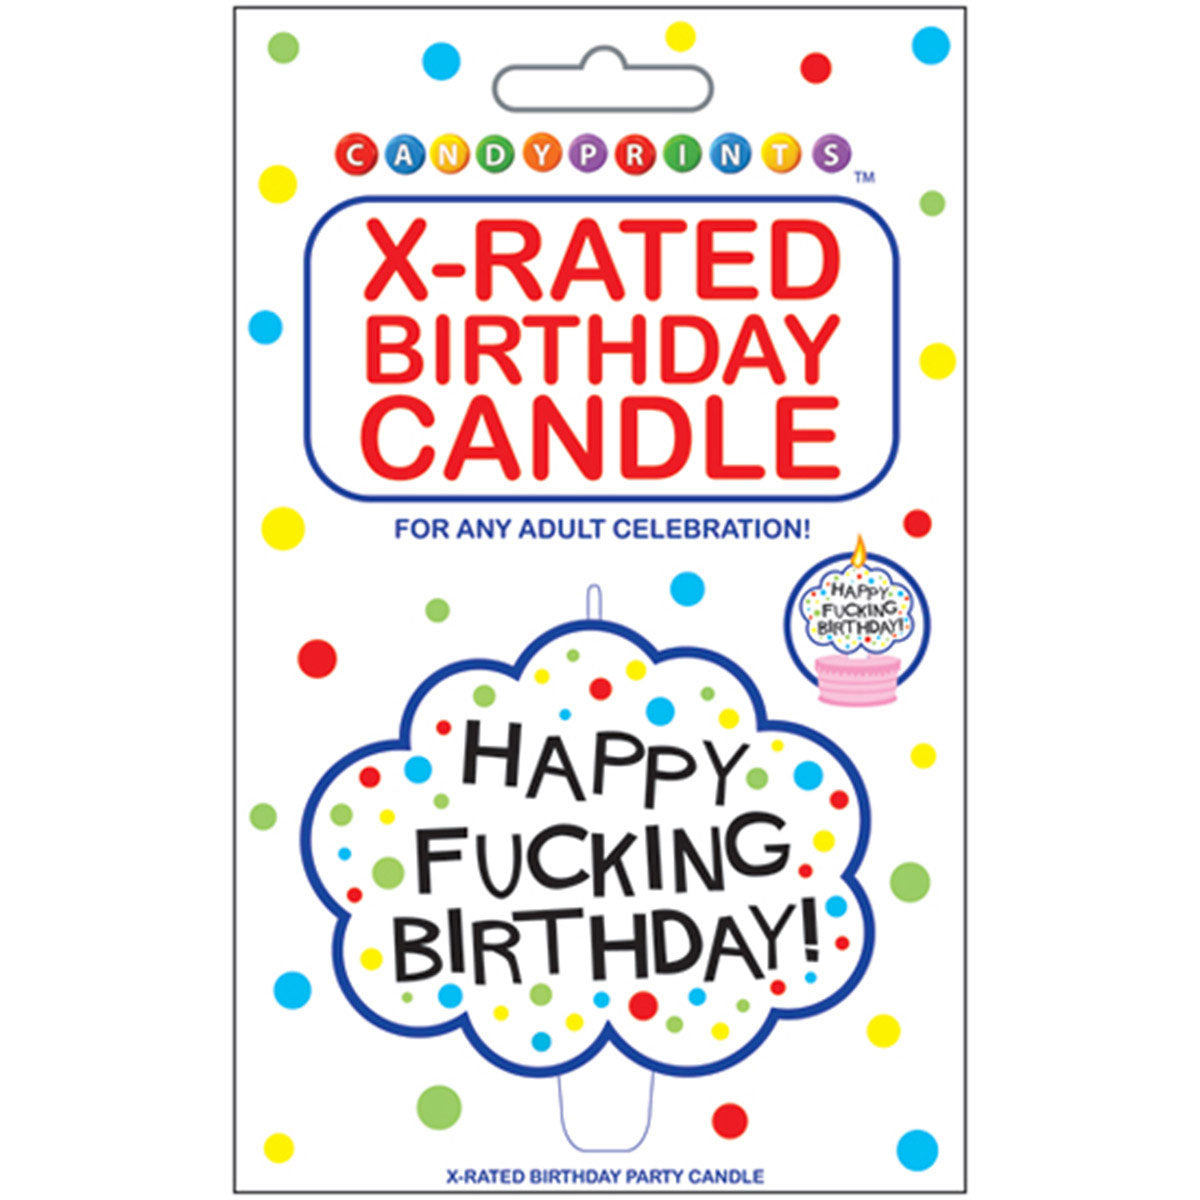 X-Rated Birthday Candle Happy F***ing Birthday!